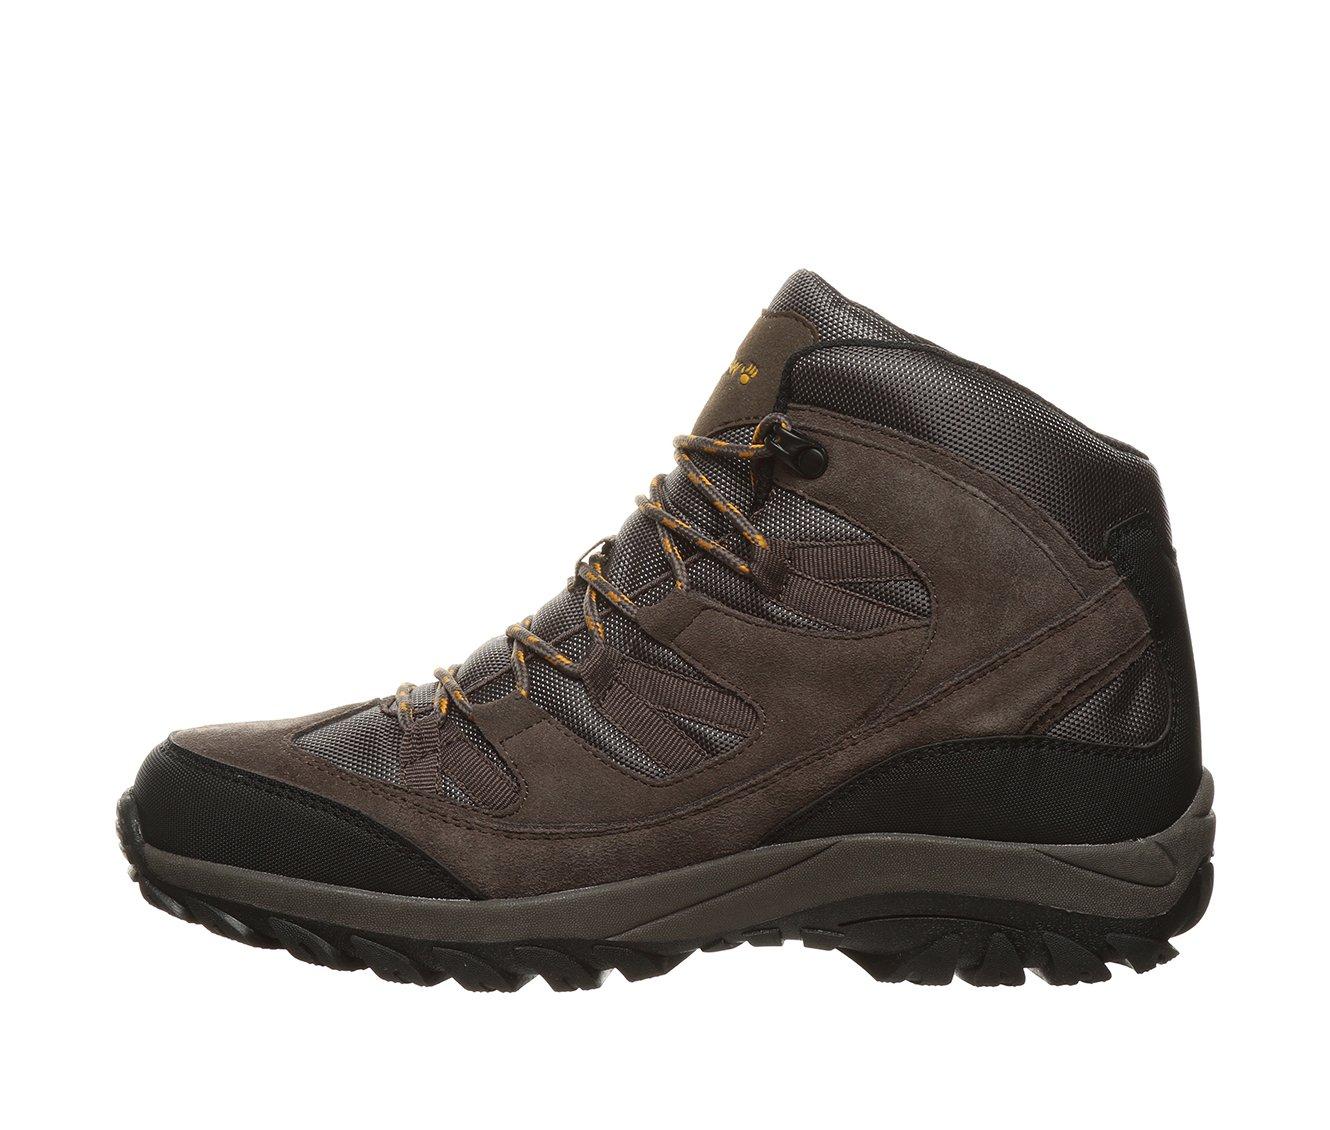 Men's Bearpaw Tallac Waterproof Hiking Boots Opening Sales is the ...